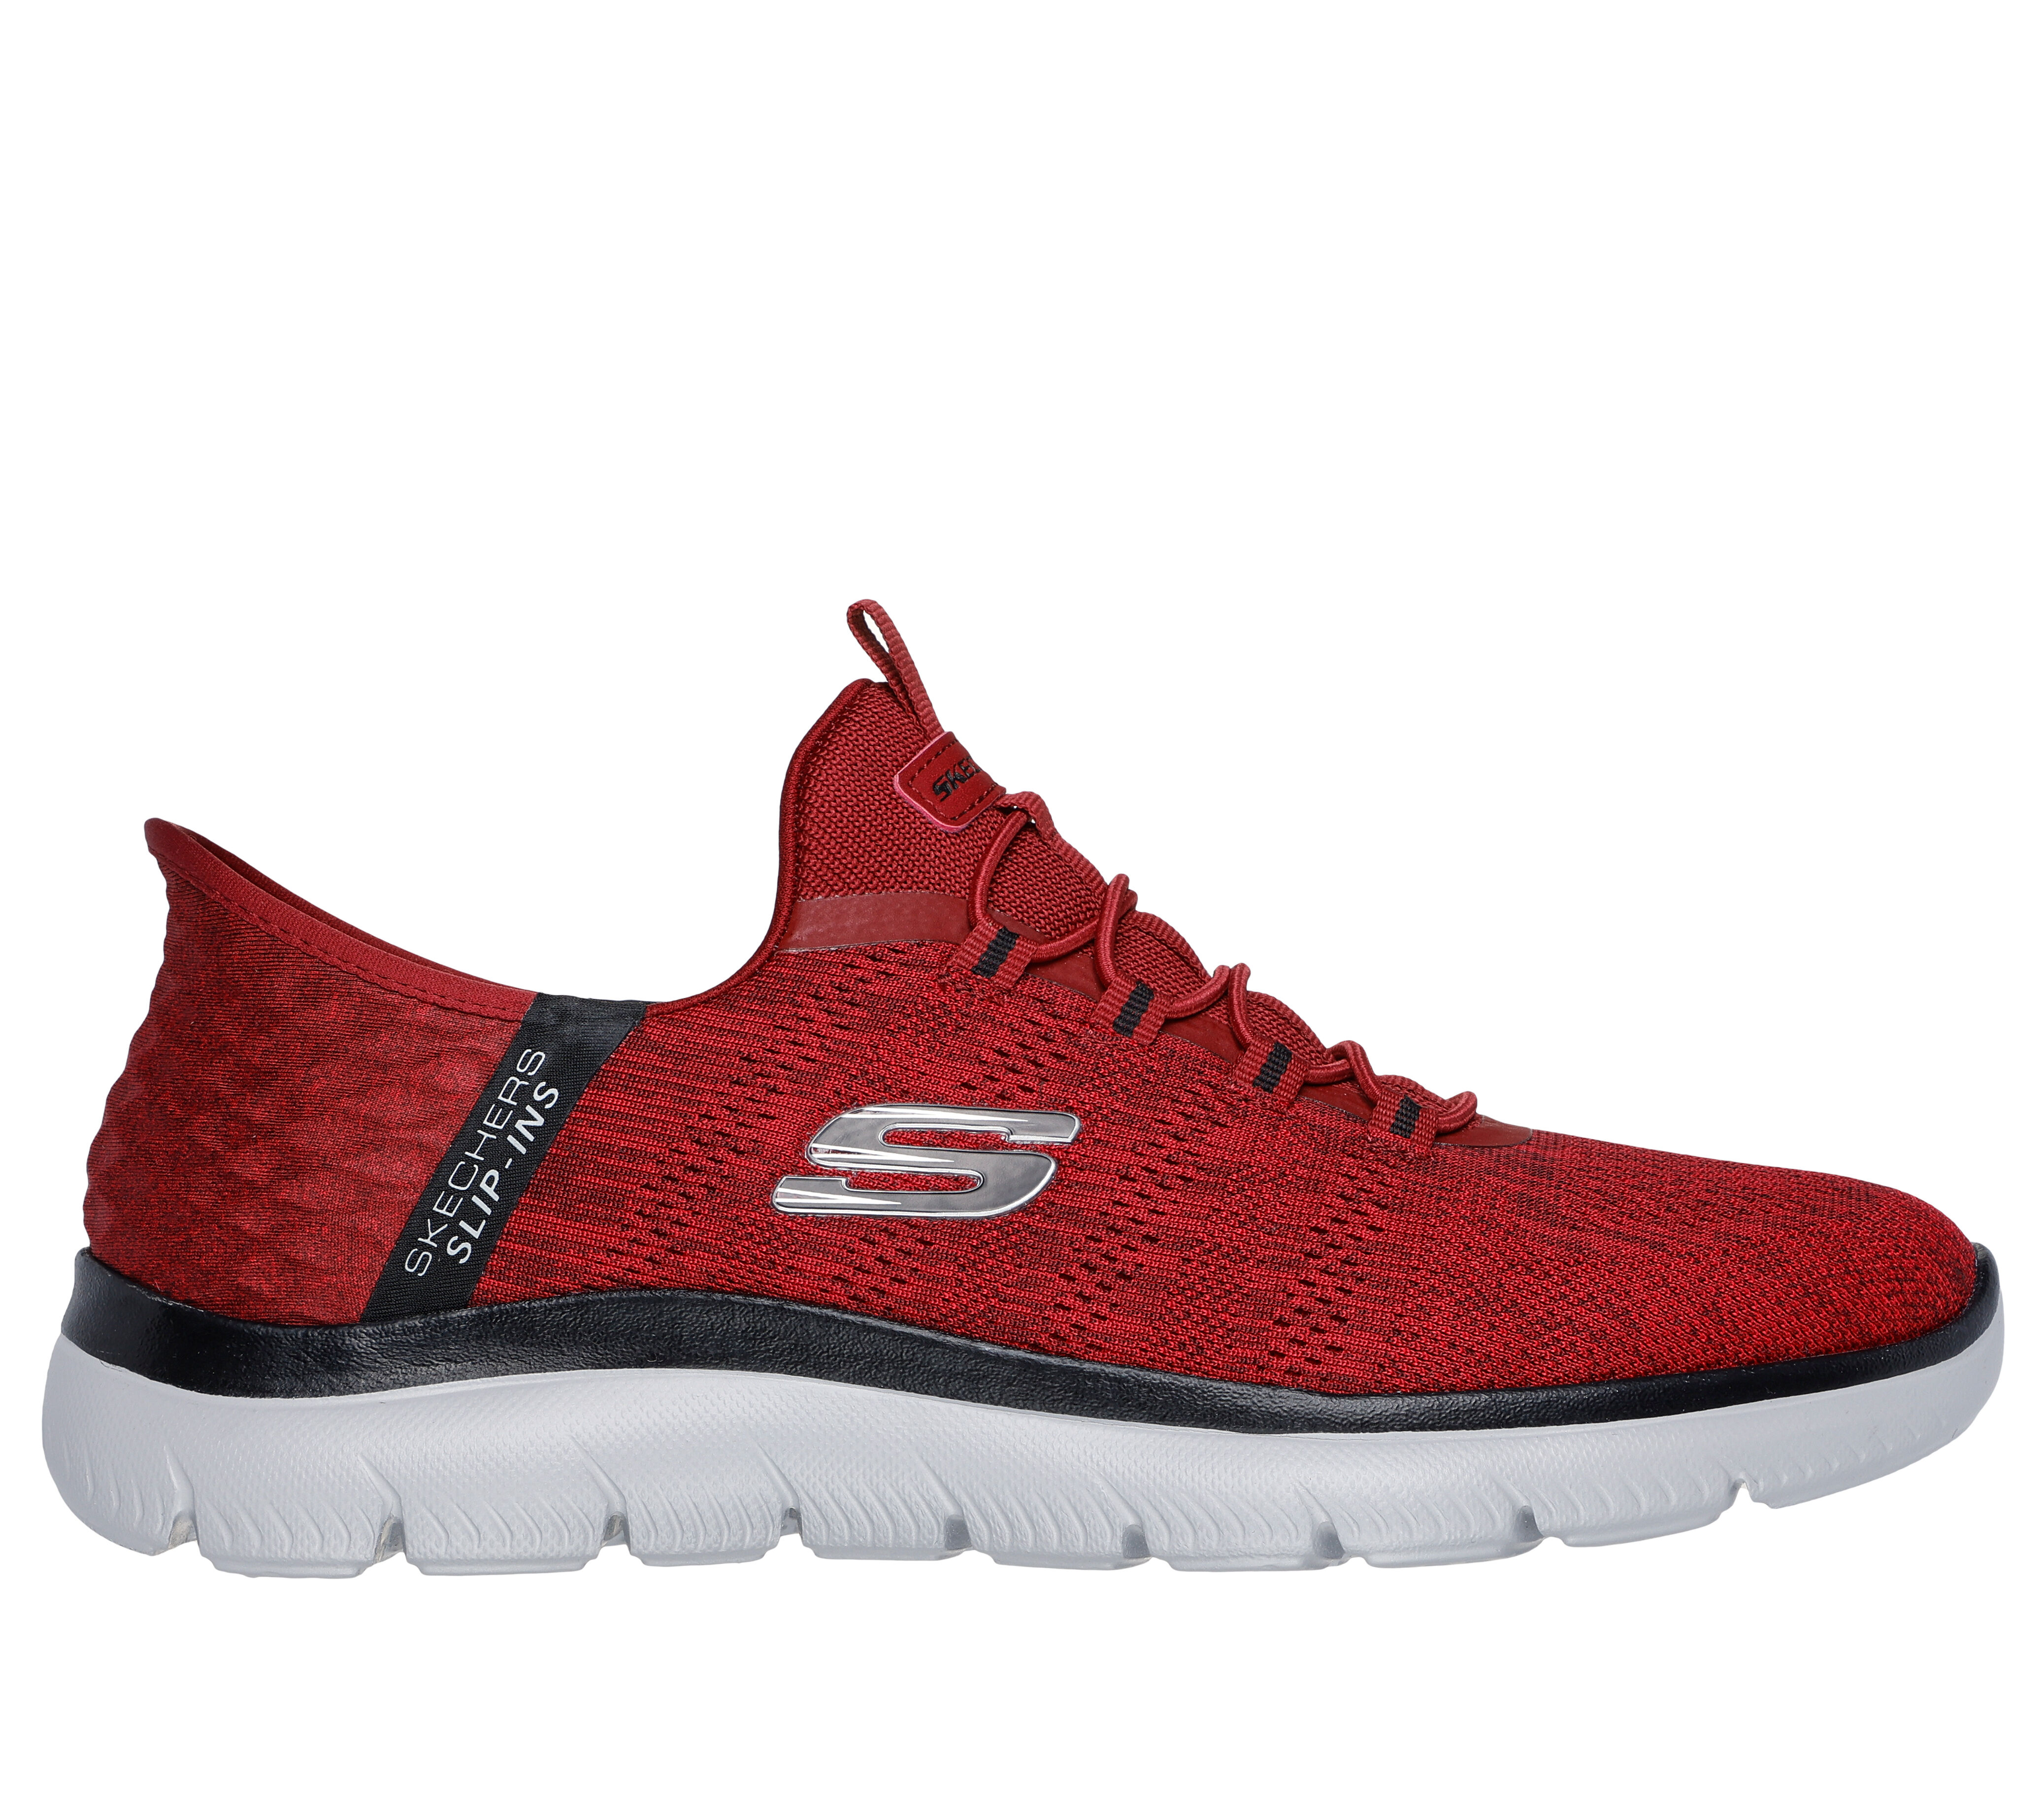 Shop by Collection | Men's Shoes | SKECHERS